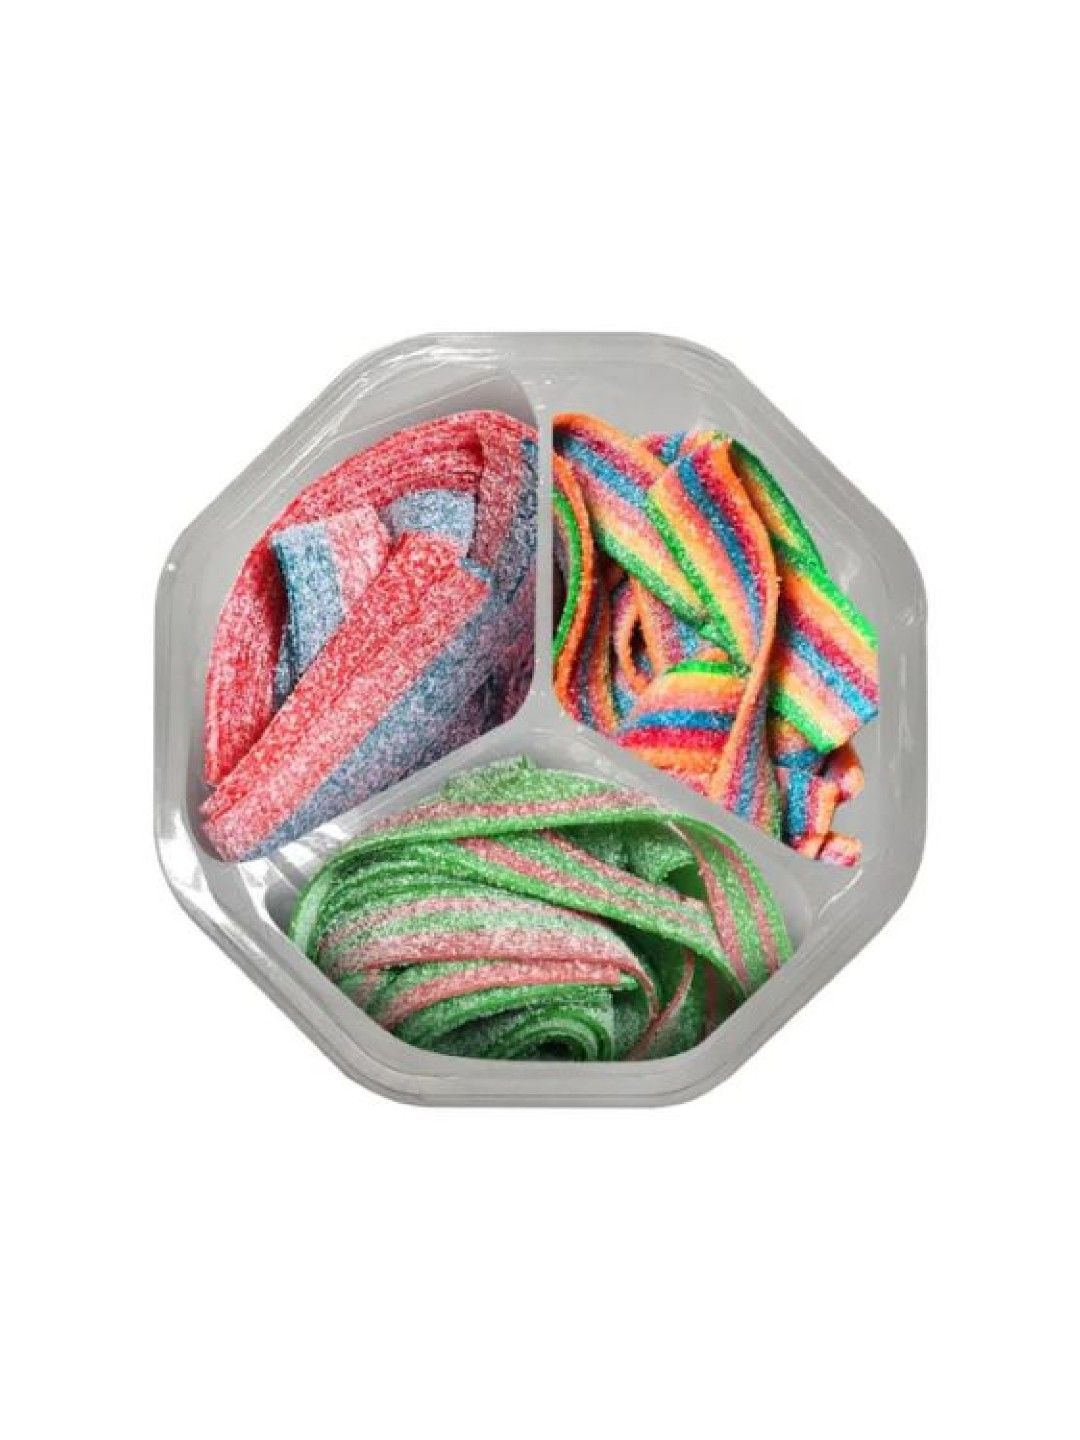 Candy Corner Snack Tray Sour Belts Duo Flavor (300g)